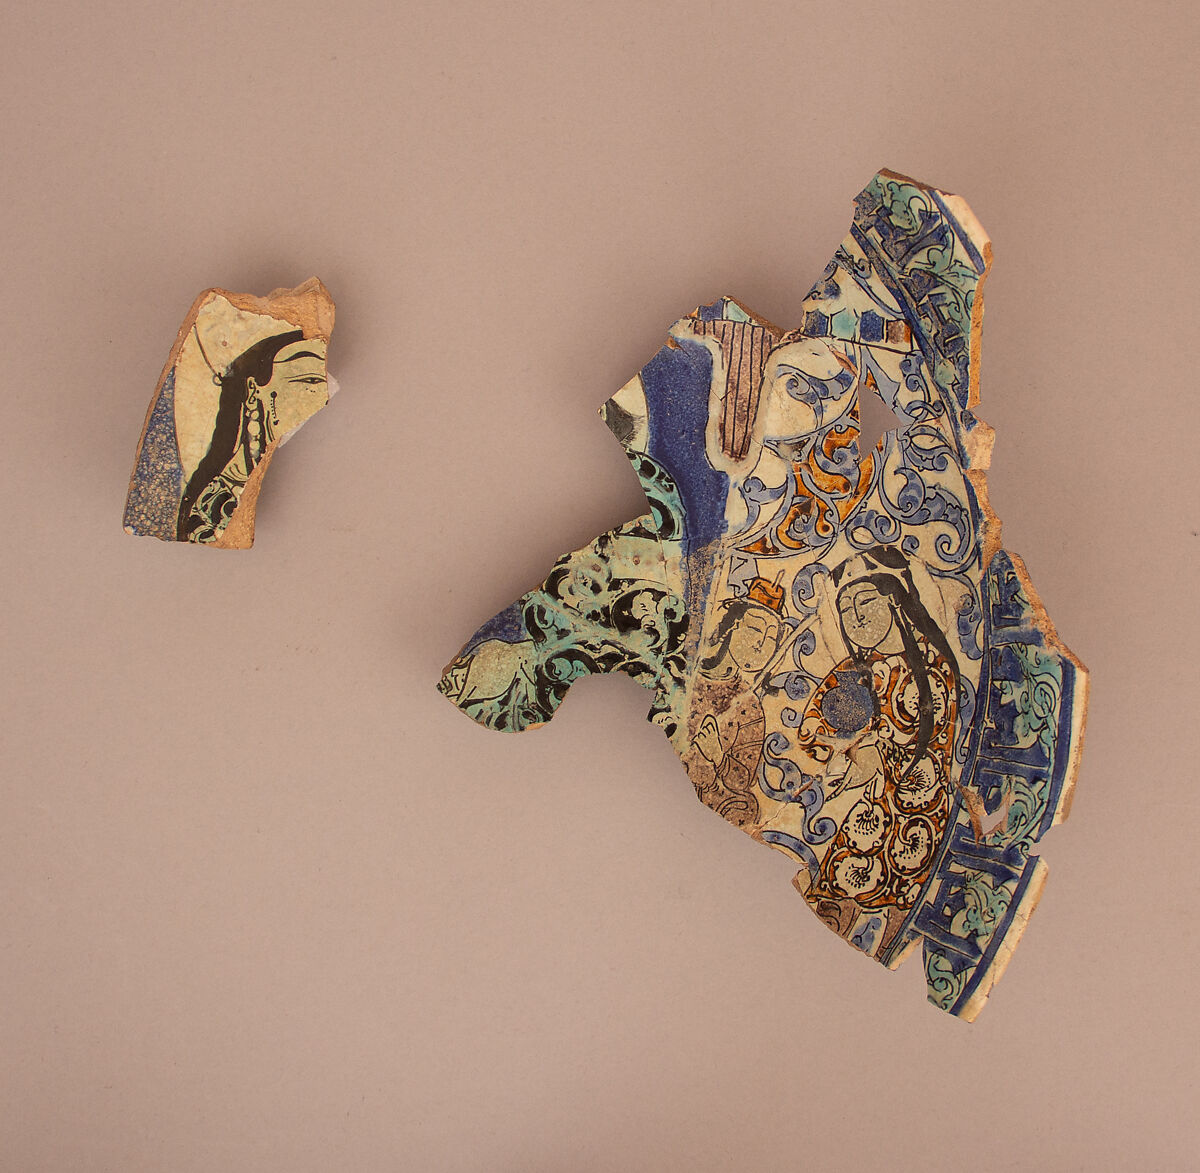 Fragments of a Dish